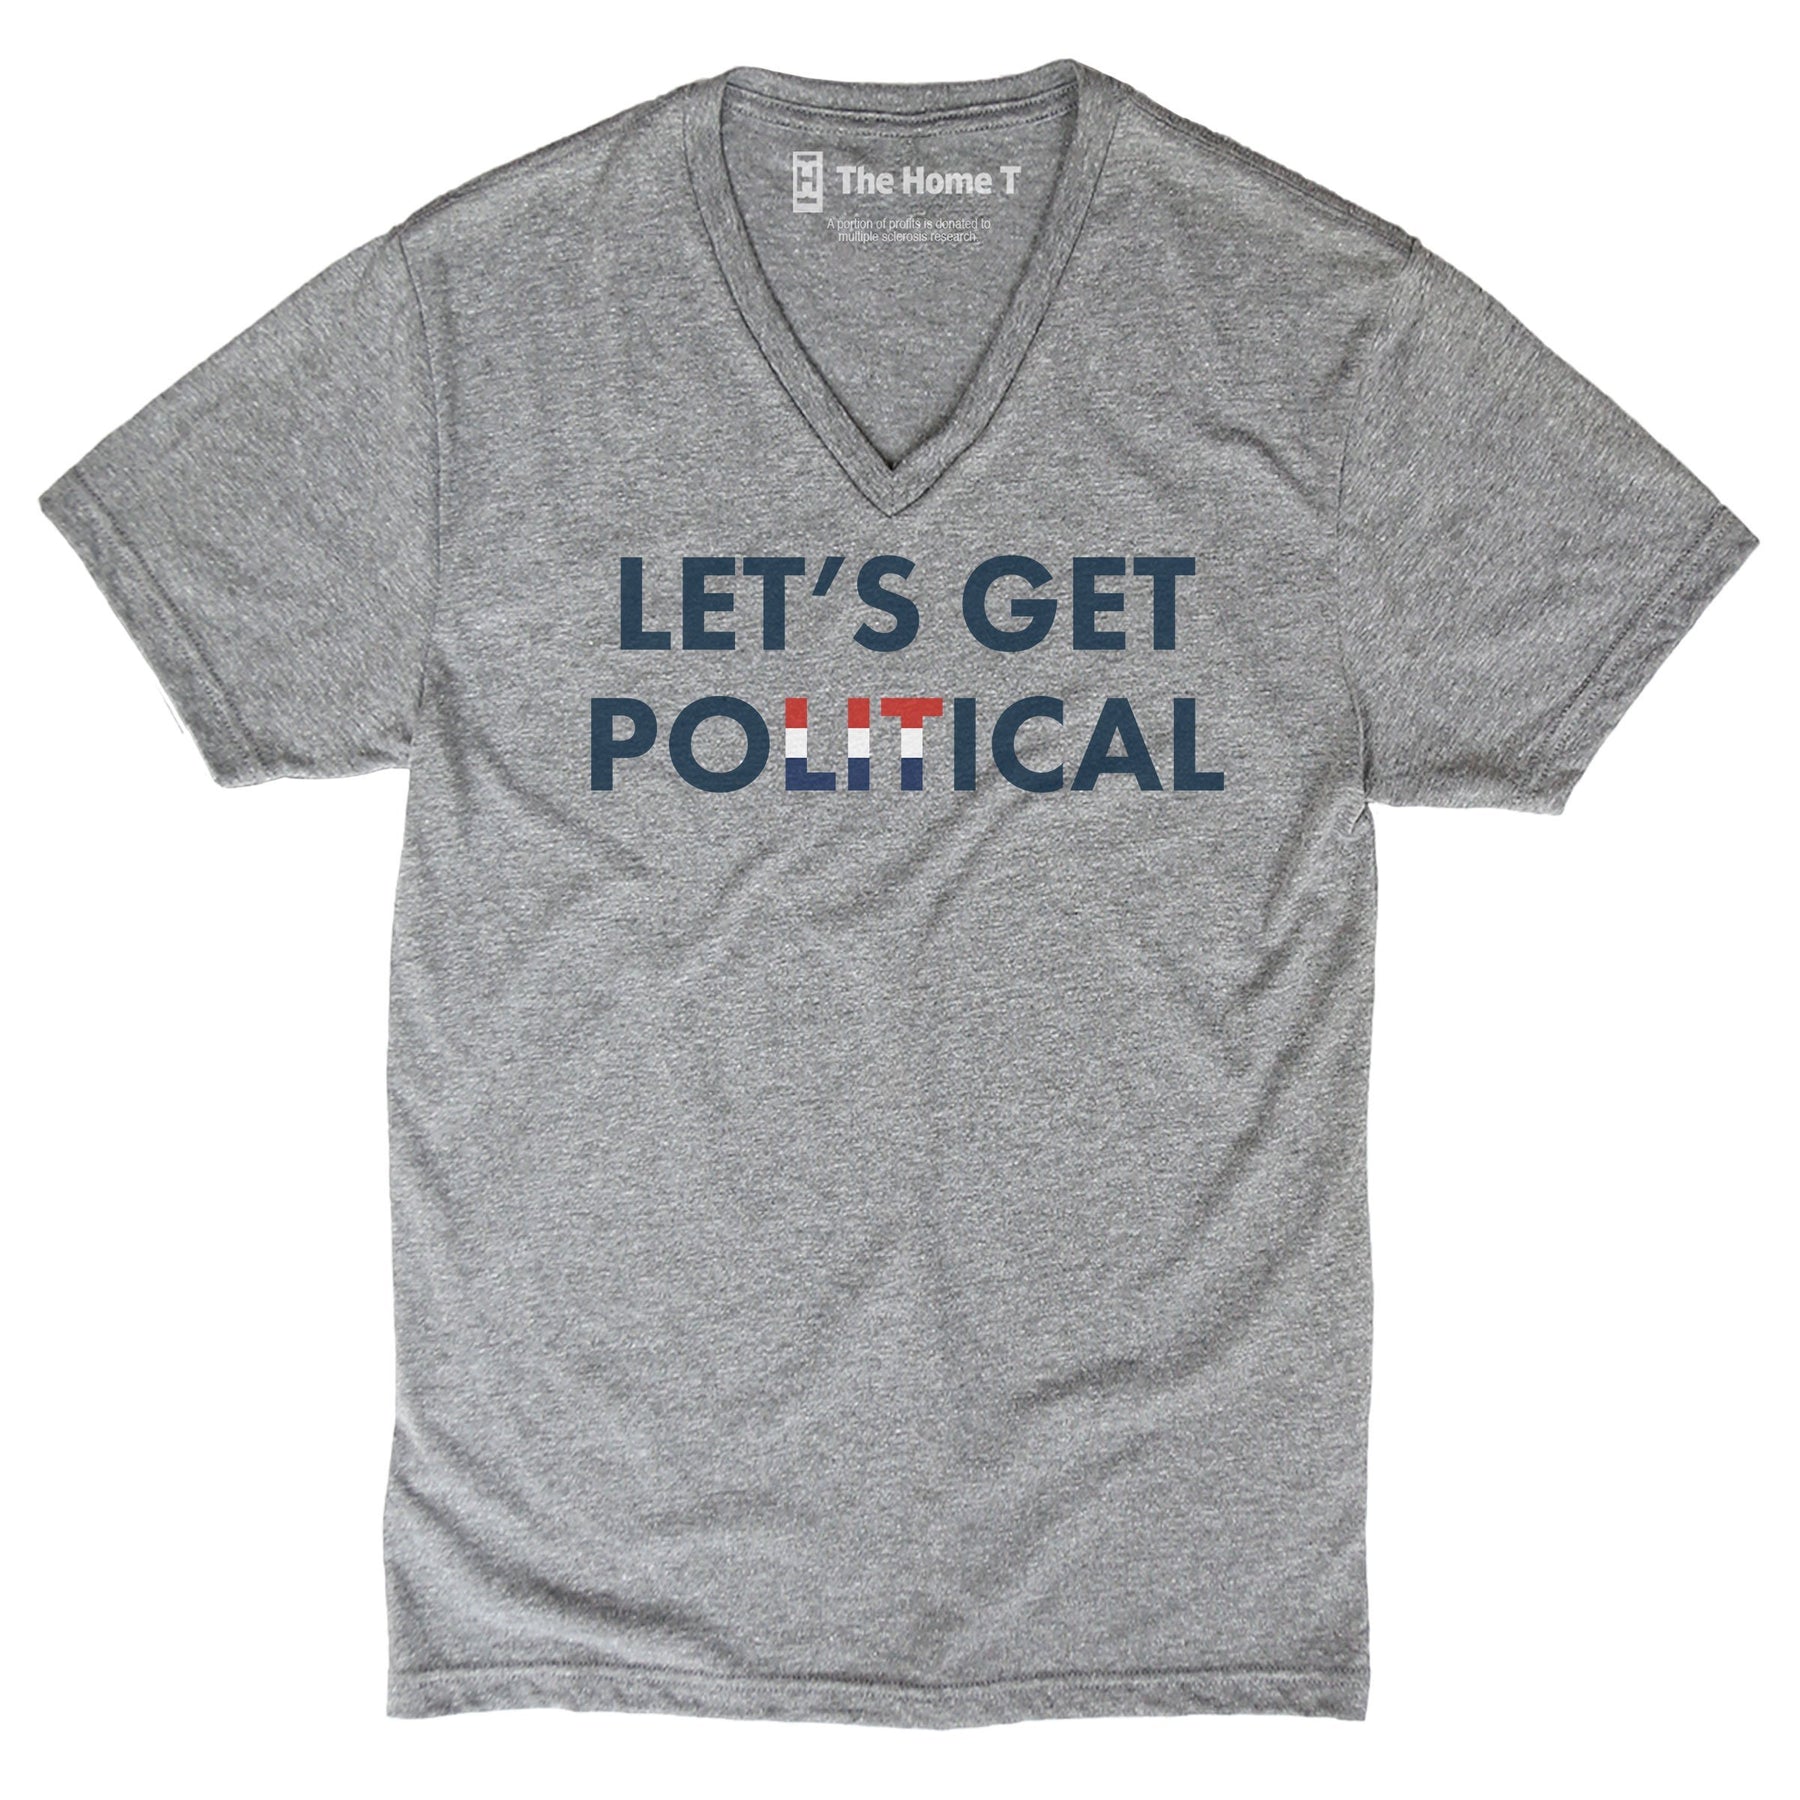 Let's Get Politcal The Home T XS V NECK